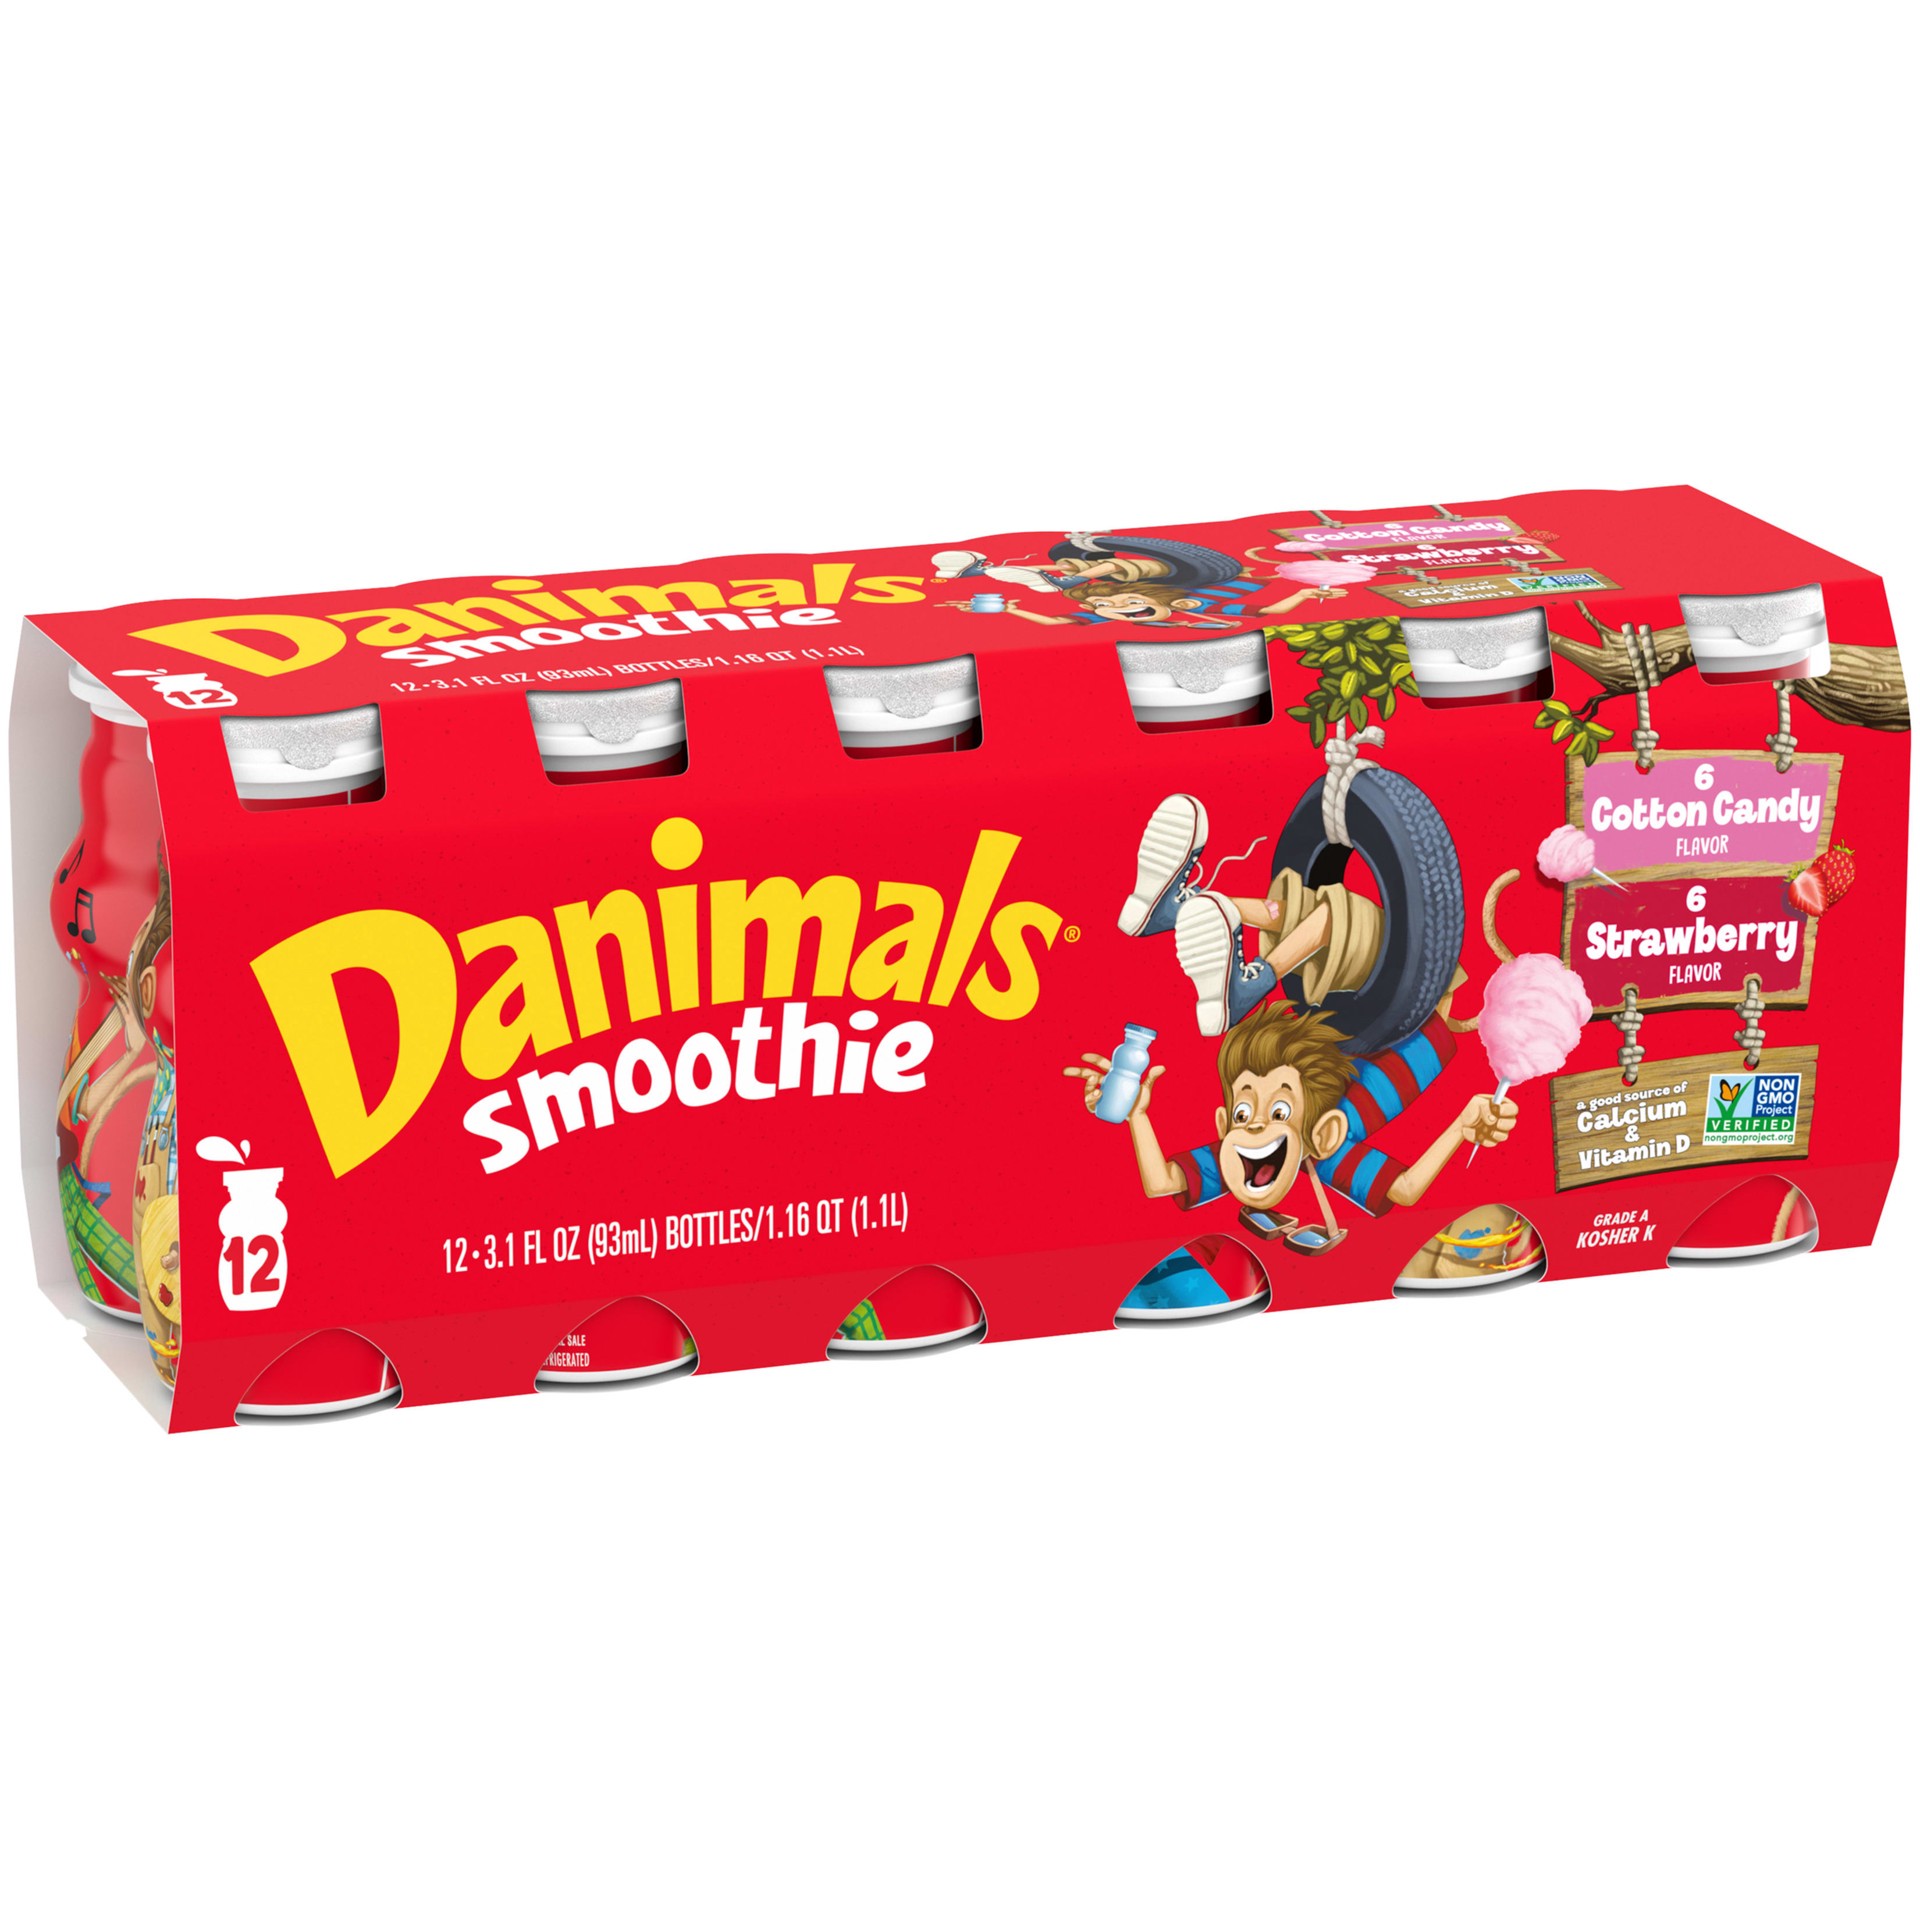 slide 4 of 5, Danimals Smoothies, Strawberry Explosion & Cotton Candy, Gluten-Free, Non-GMO Project Verified, 3.1 oz., 12 Pack, 3.10 fl. oz